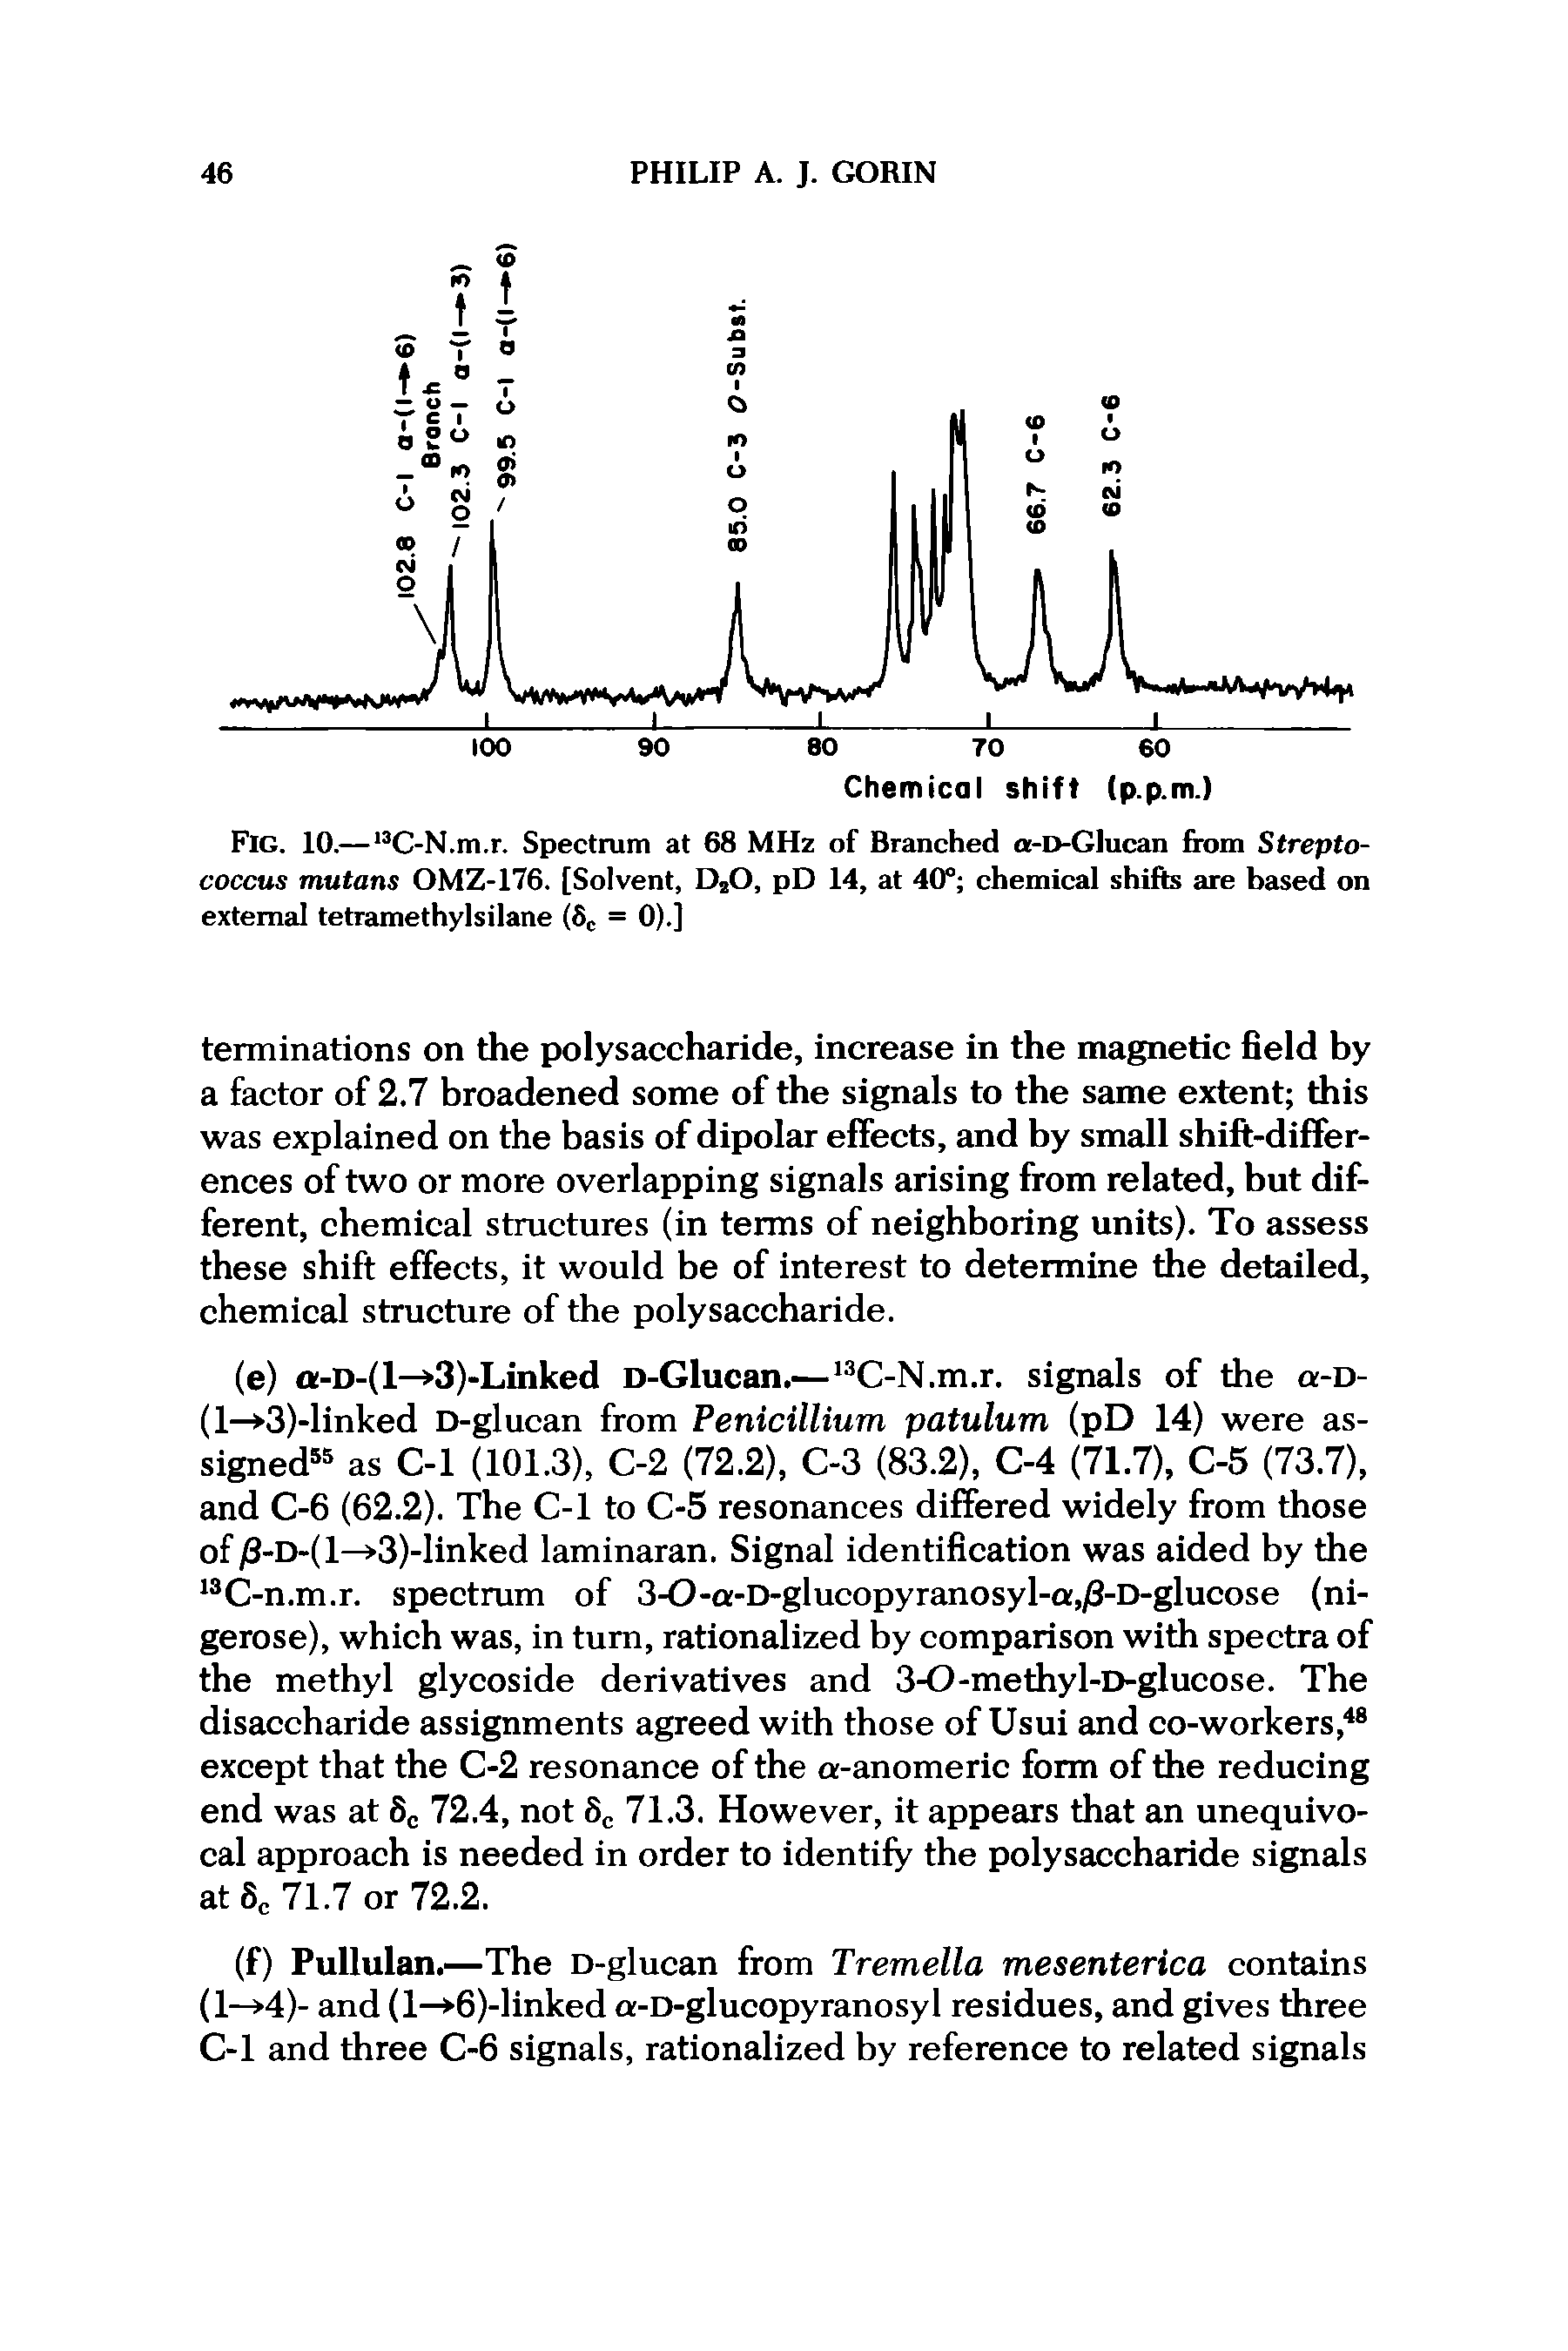 Fig. 10.—13C-N.m.r. Spectrum at 68 MHz of Branched a-D-Glucan from Streptococcus mutans OMZ-176. [Solvent, DsO, pD 14, at 40° chemical shifts are based on external tetramethylsilane (8C = 0).]...